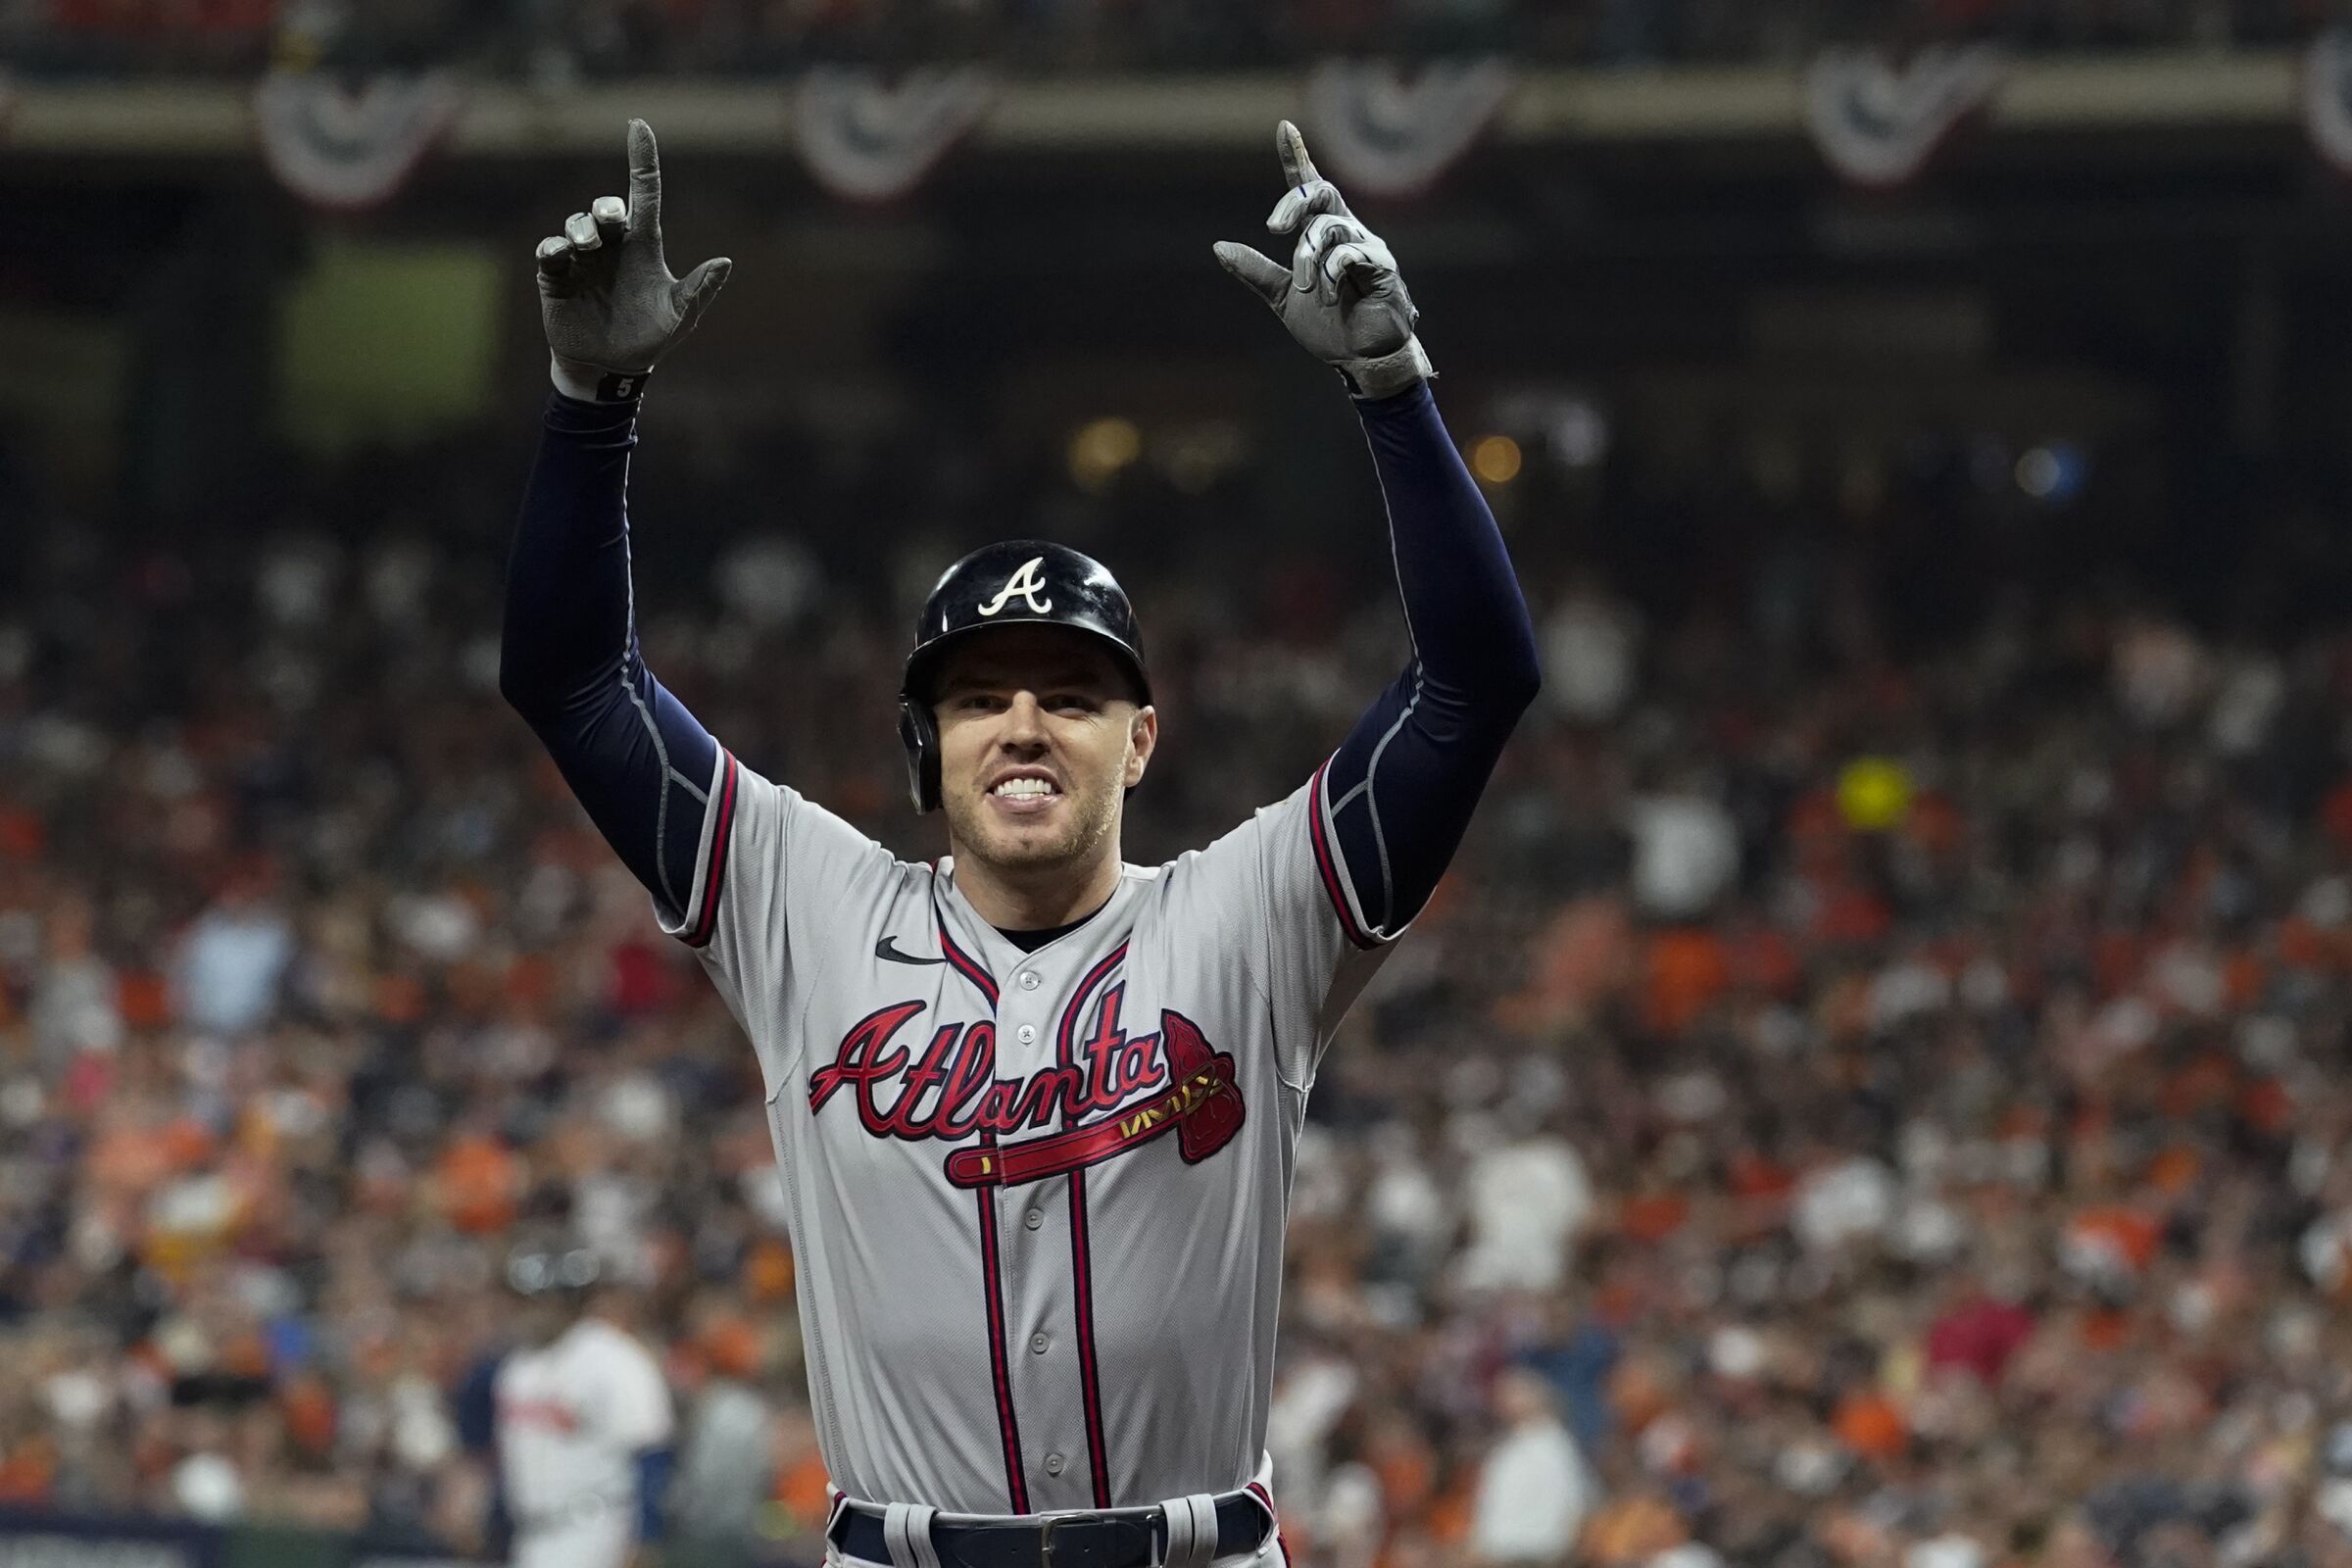 Braves first baseman celebrates his home run in Game 6 of the World Series against the Houston Astros.